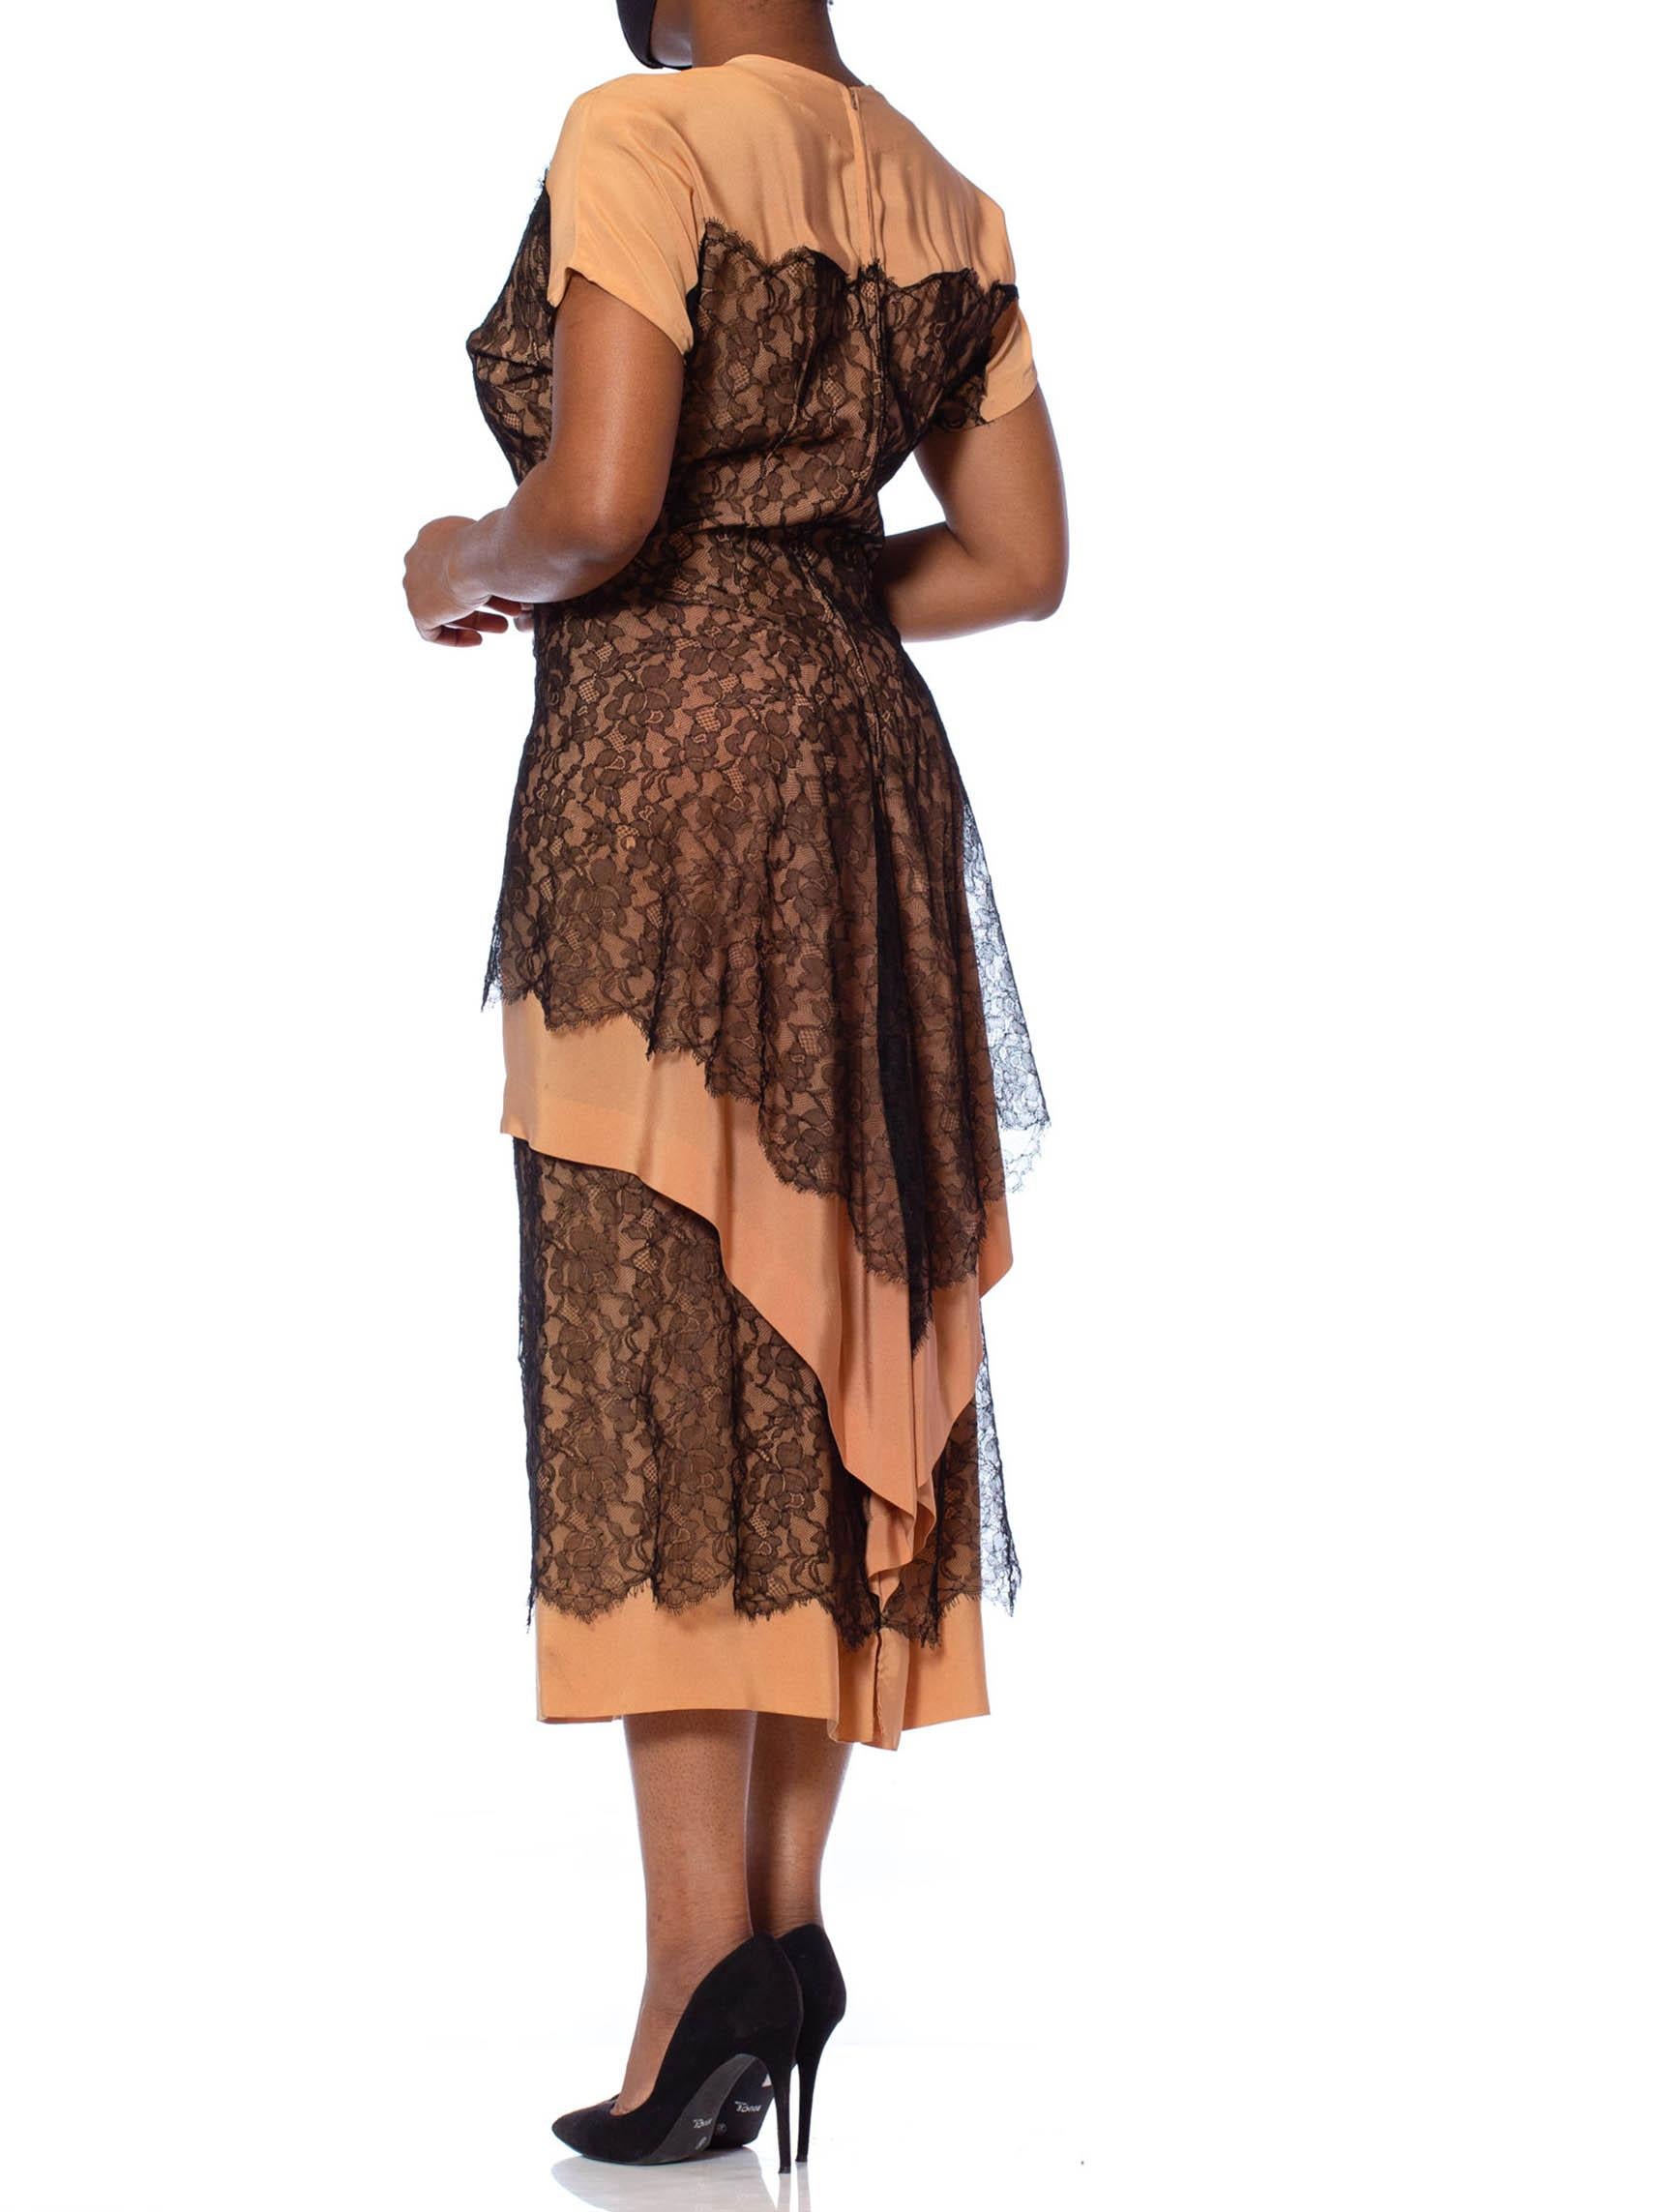 1940S NORMAN ORIGINAL Peach Silk Faille & Black Chantilly Lace Tiered Cocktail  For Sale 3